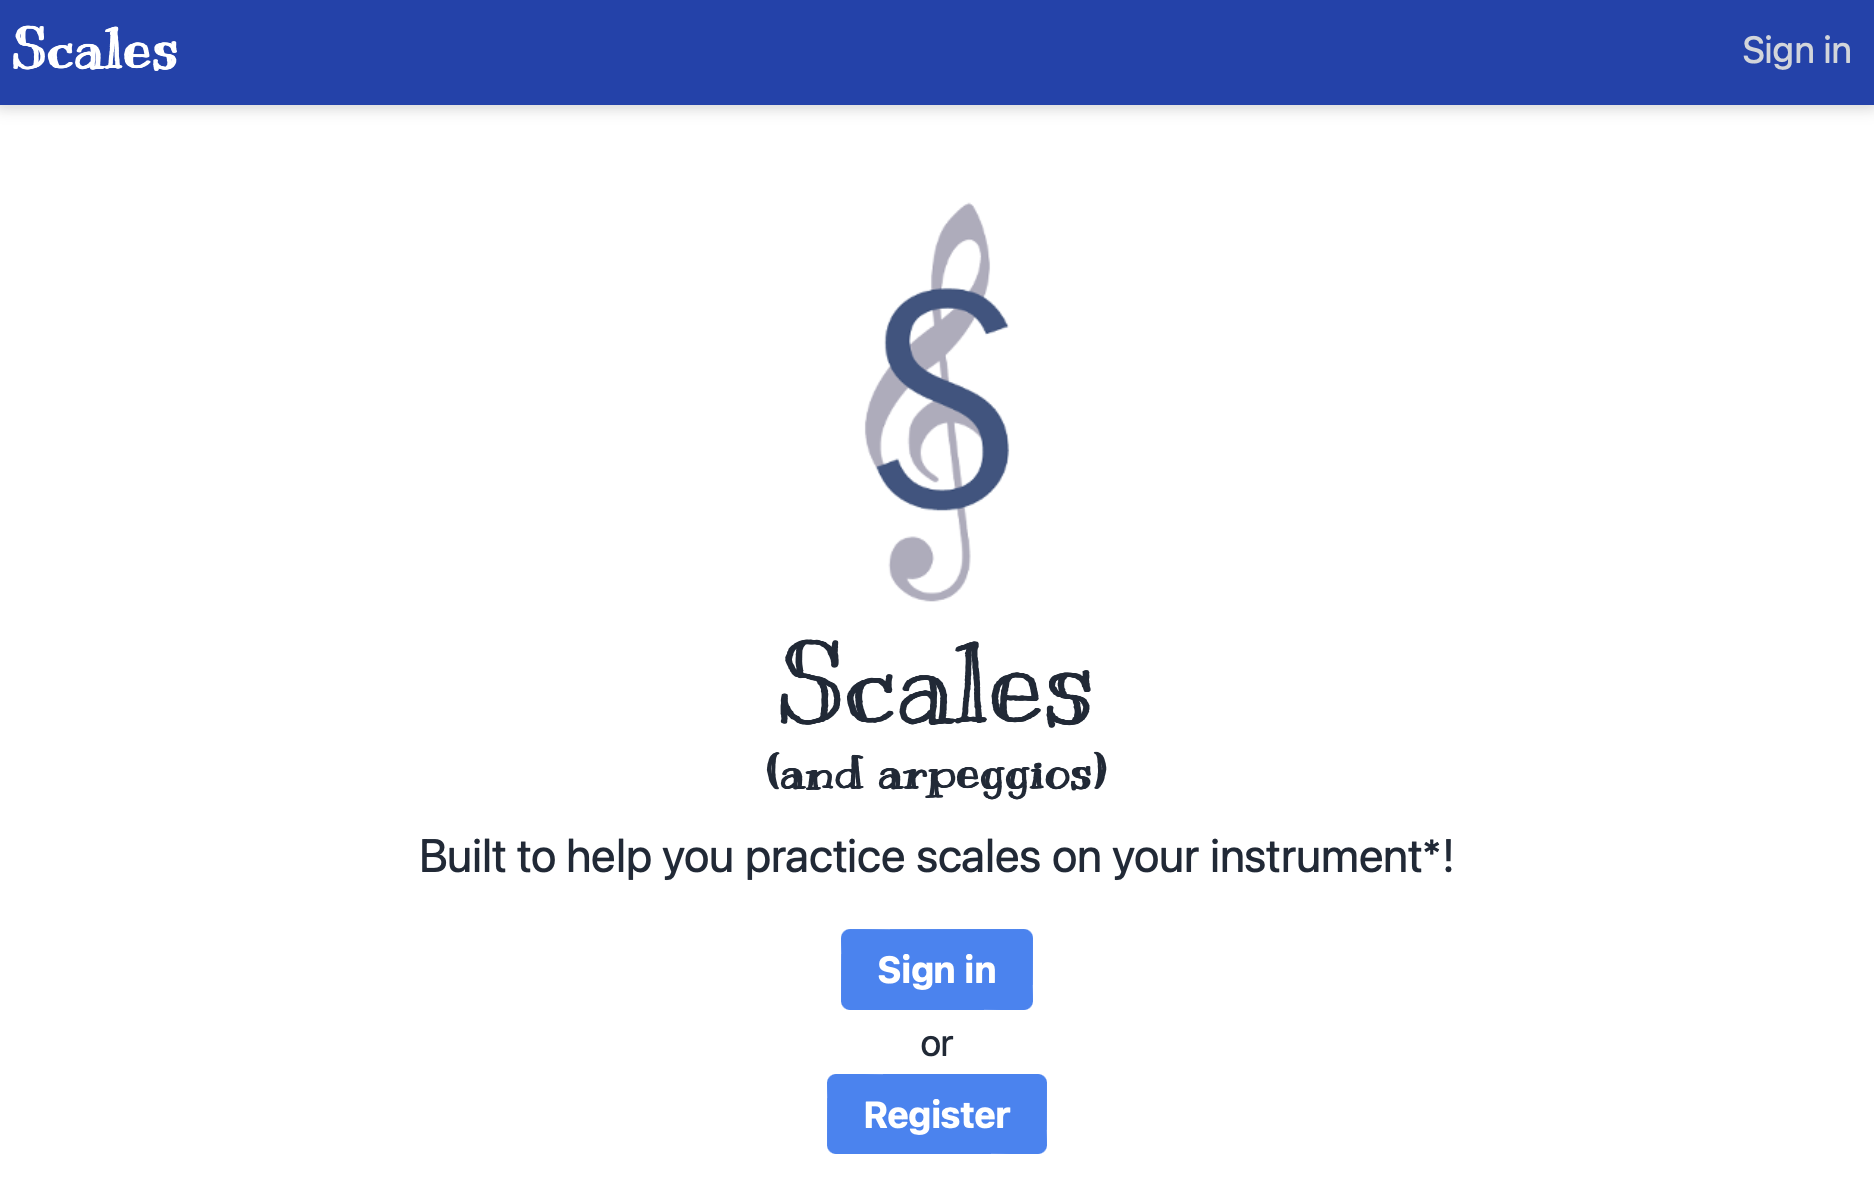 Scales practice helper logo - a treble clef with the letter S inside it